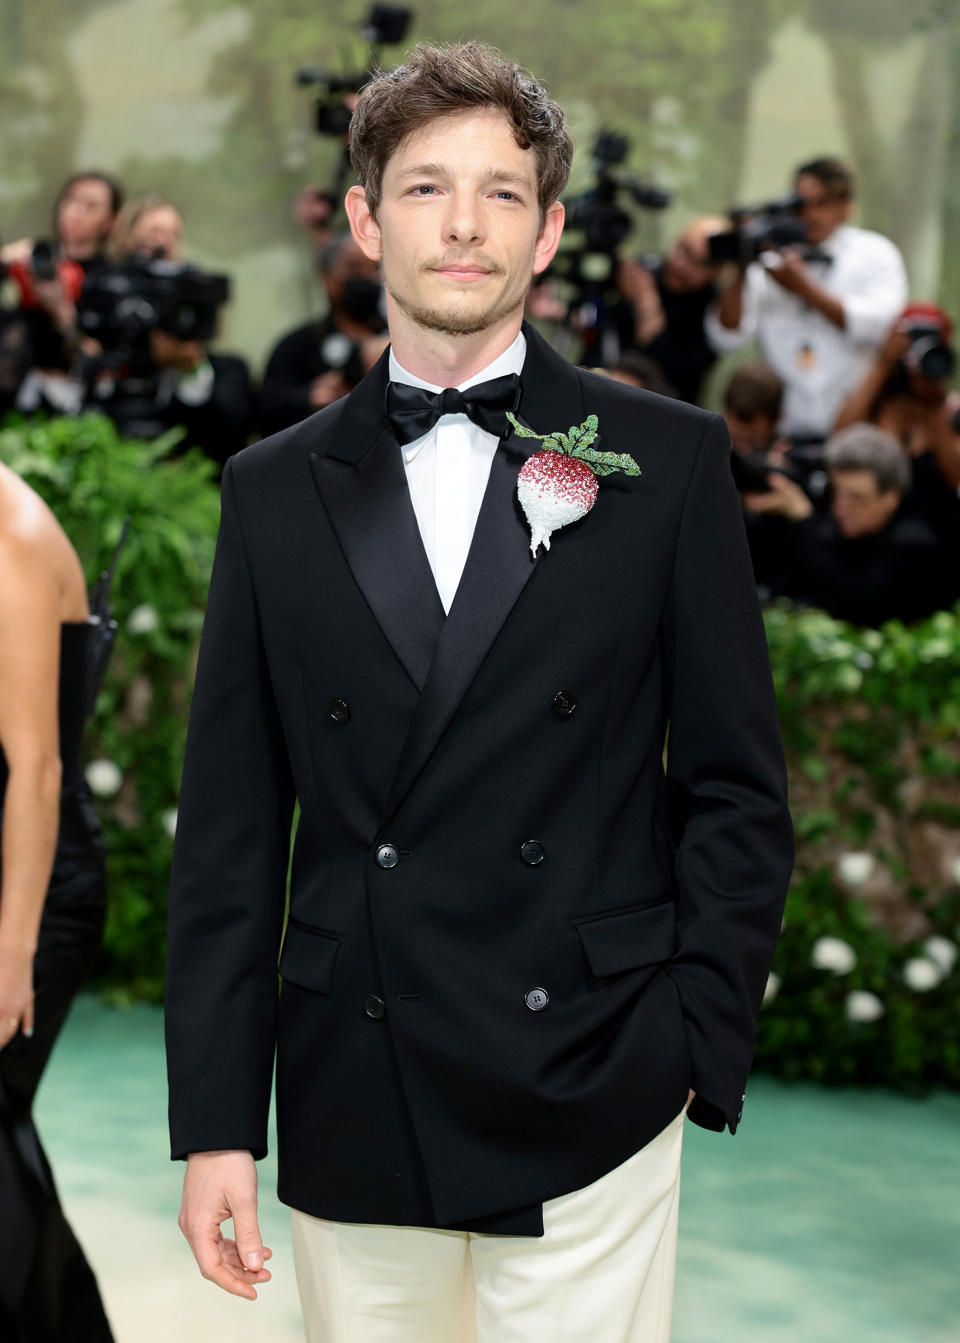 Mike Faist<span class="copyright">Dimitrios Kambouris—Getty Images for The Met Museum/Vogue</span>